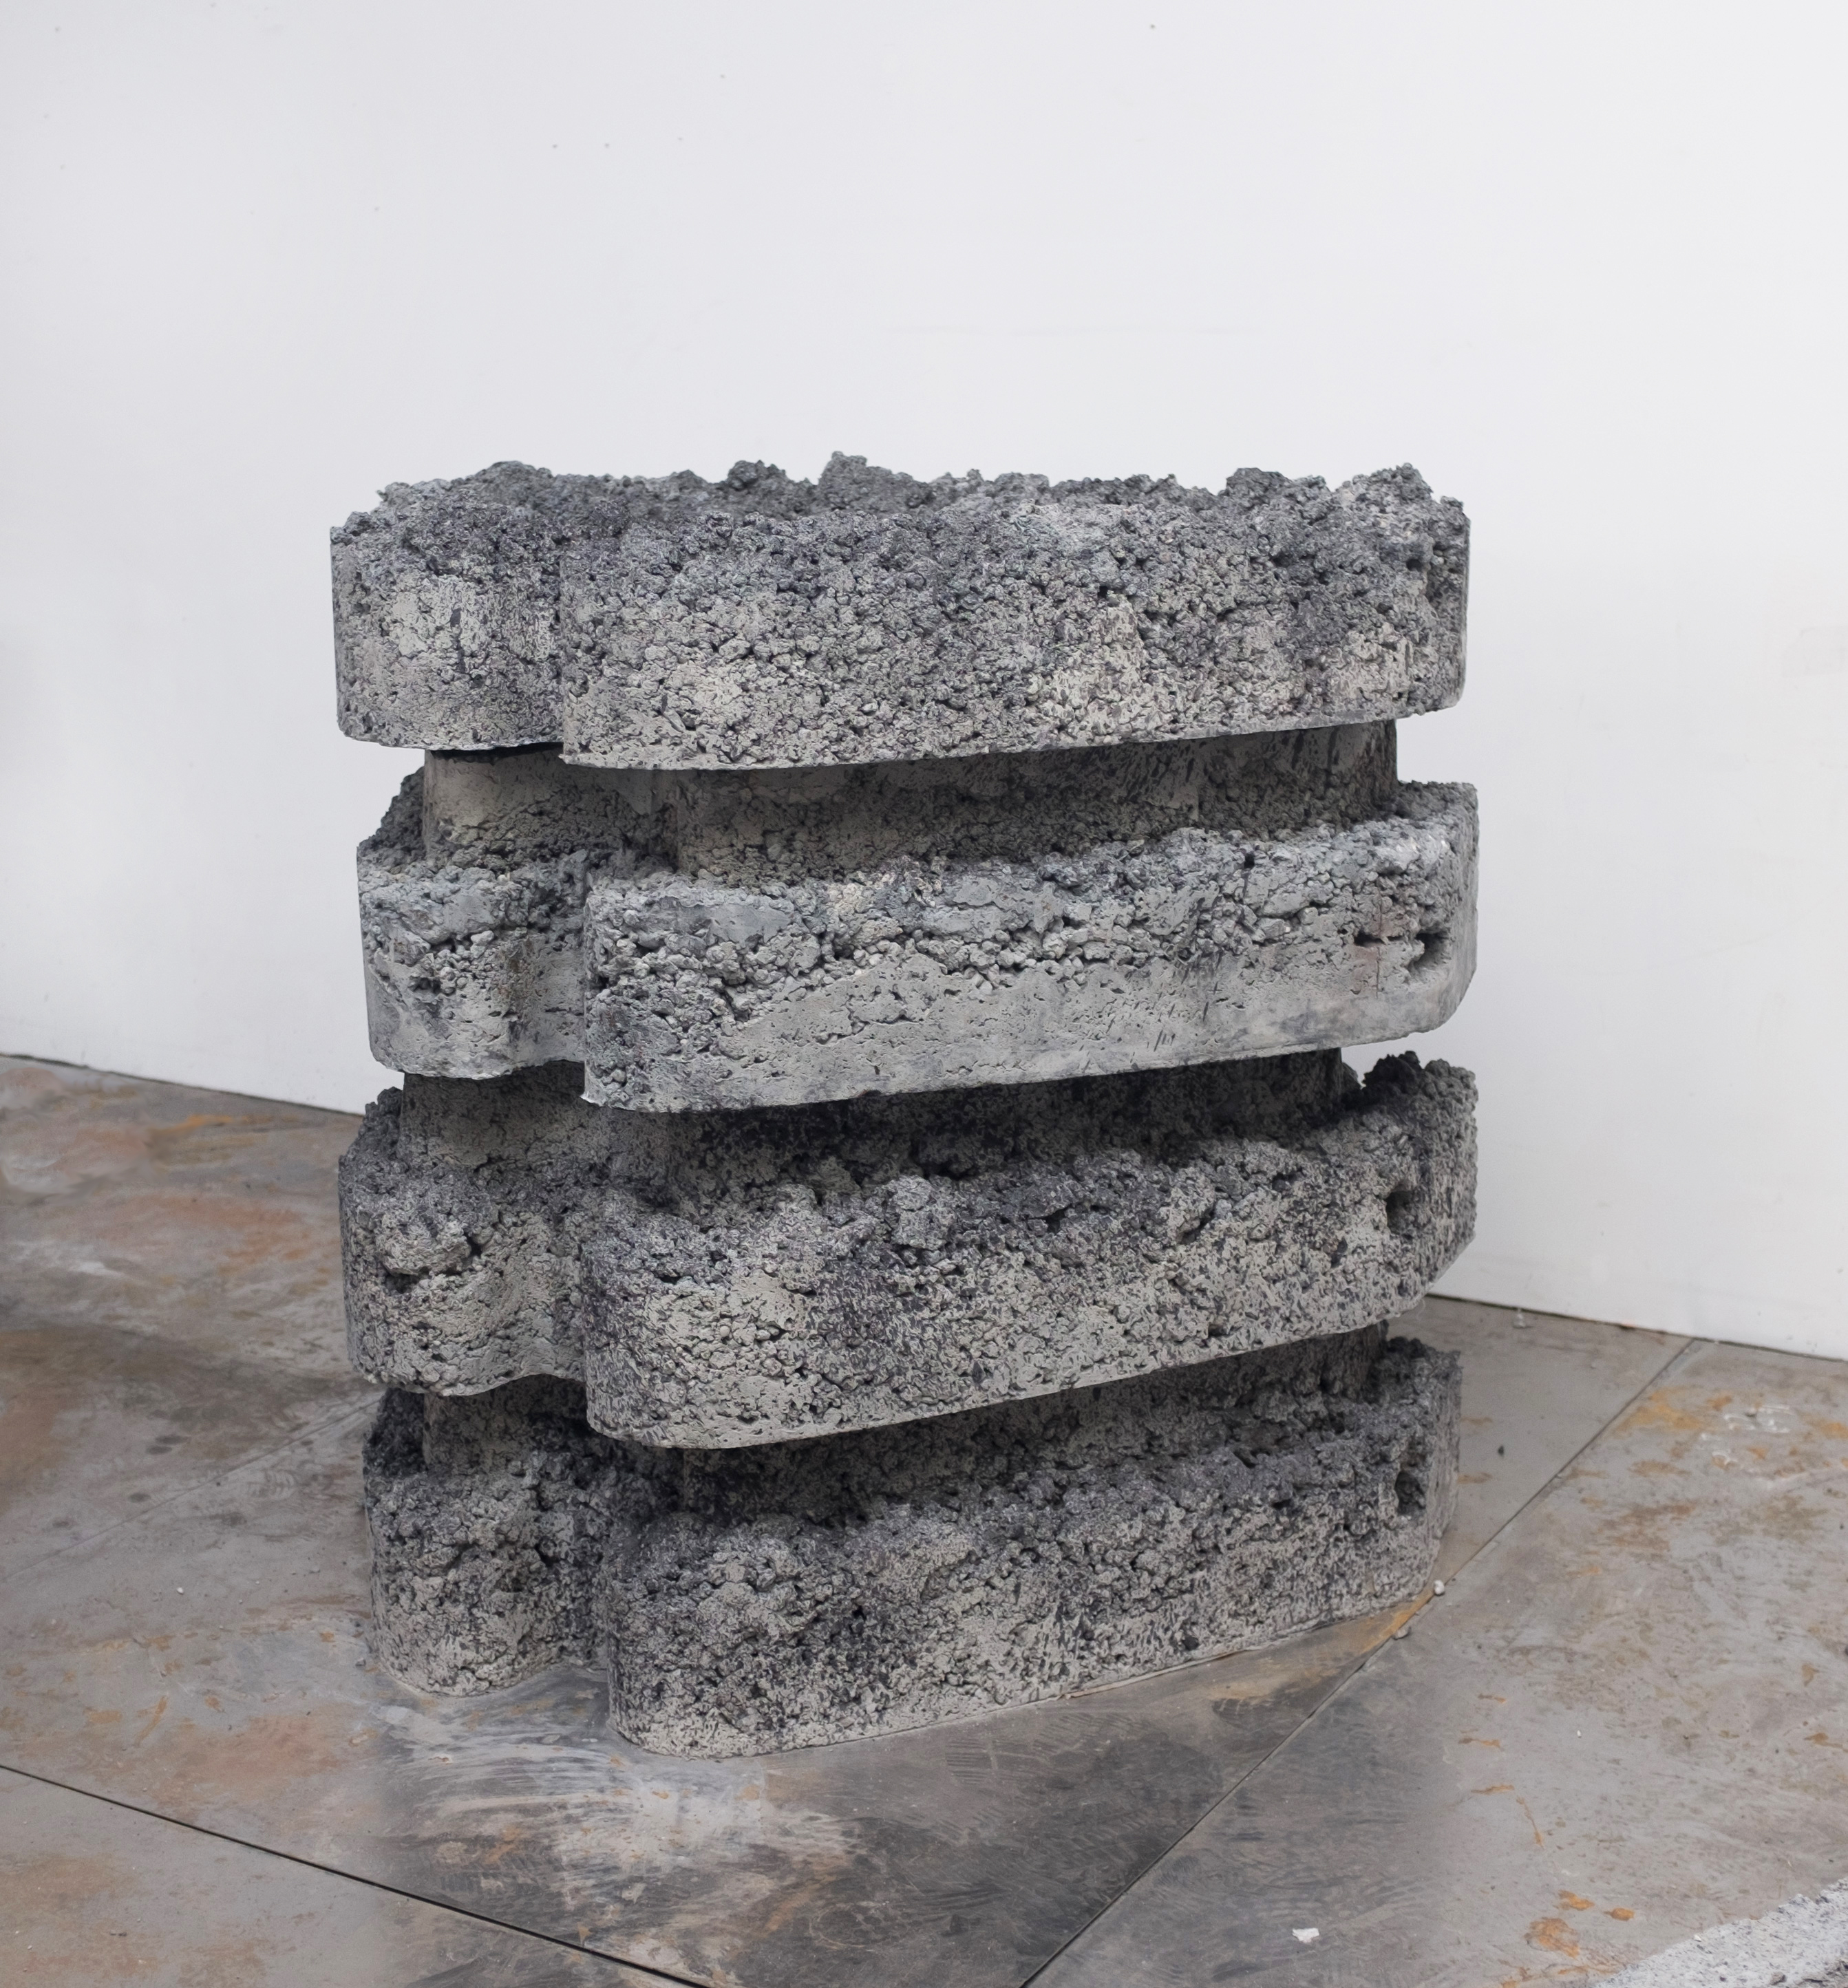 Tiril Hasselknippe, Balcony (ribbevegg), 2018, cast concrete, 40h x 34w x 41d in.